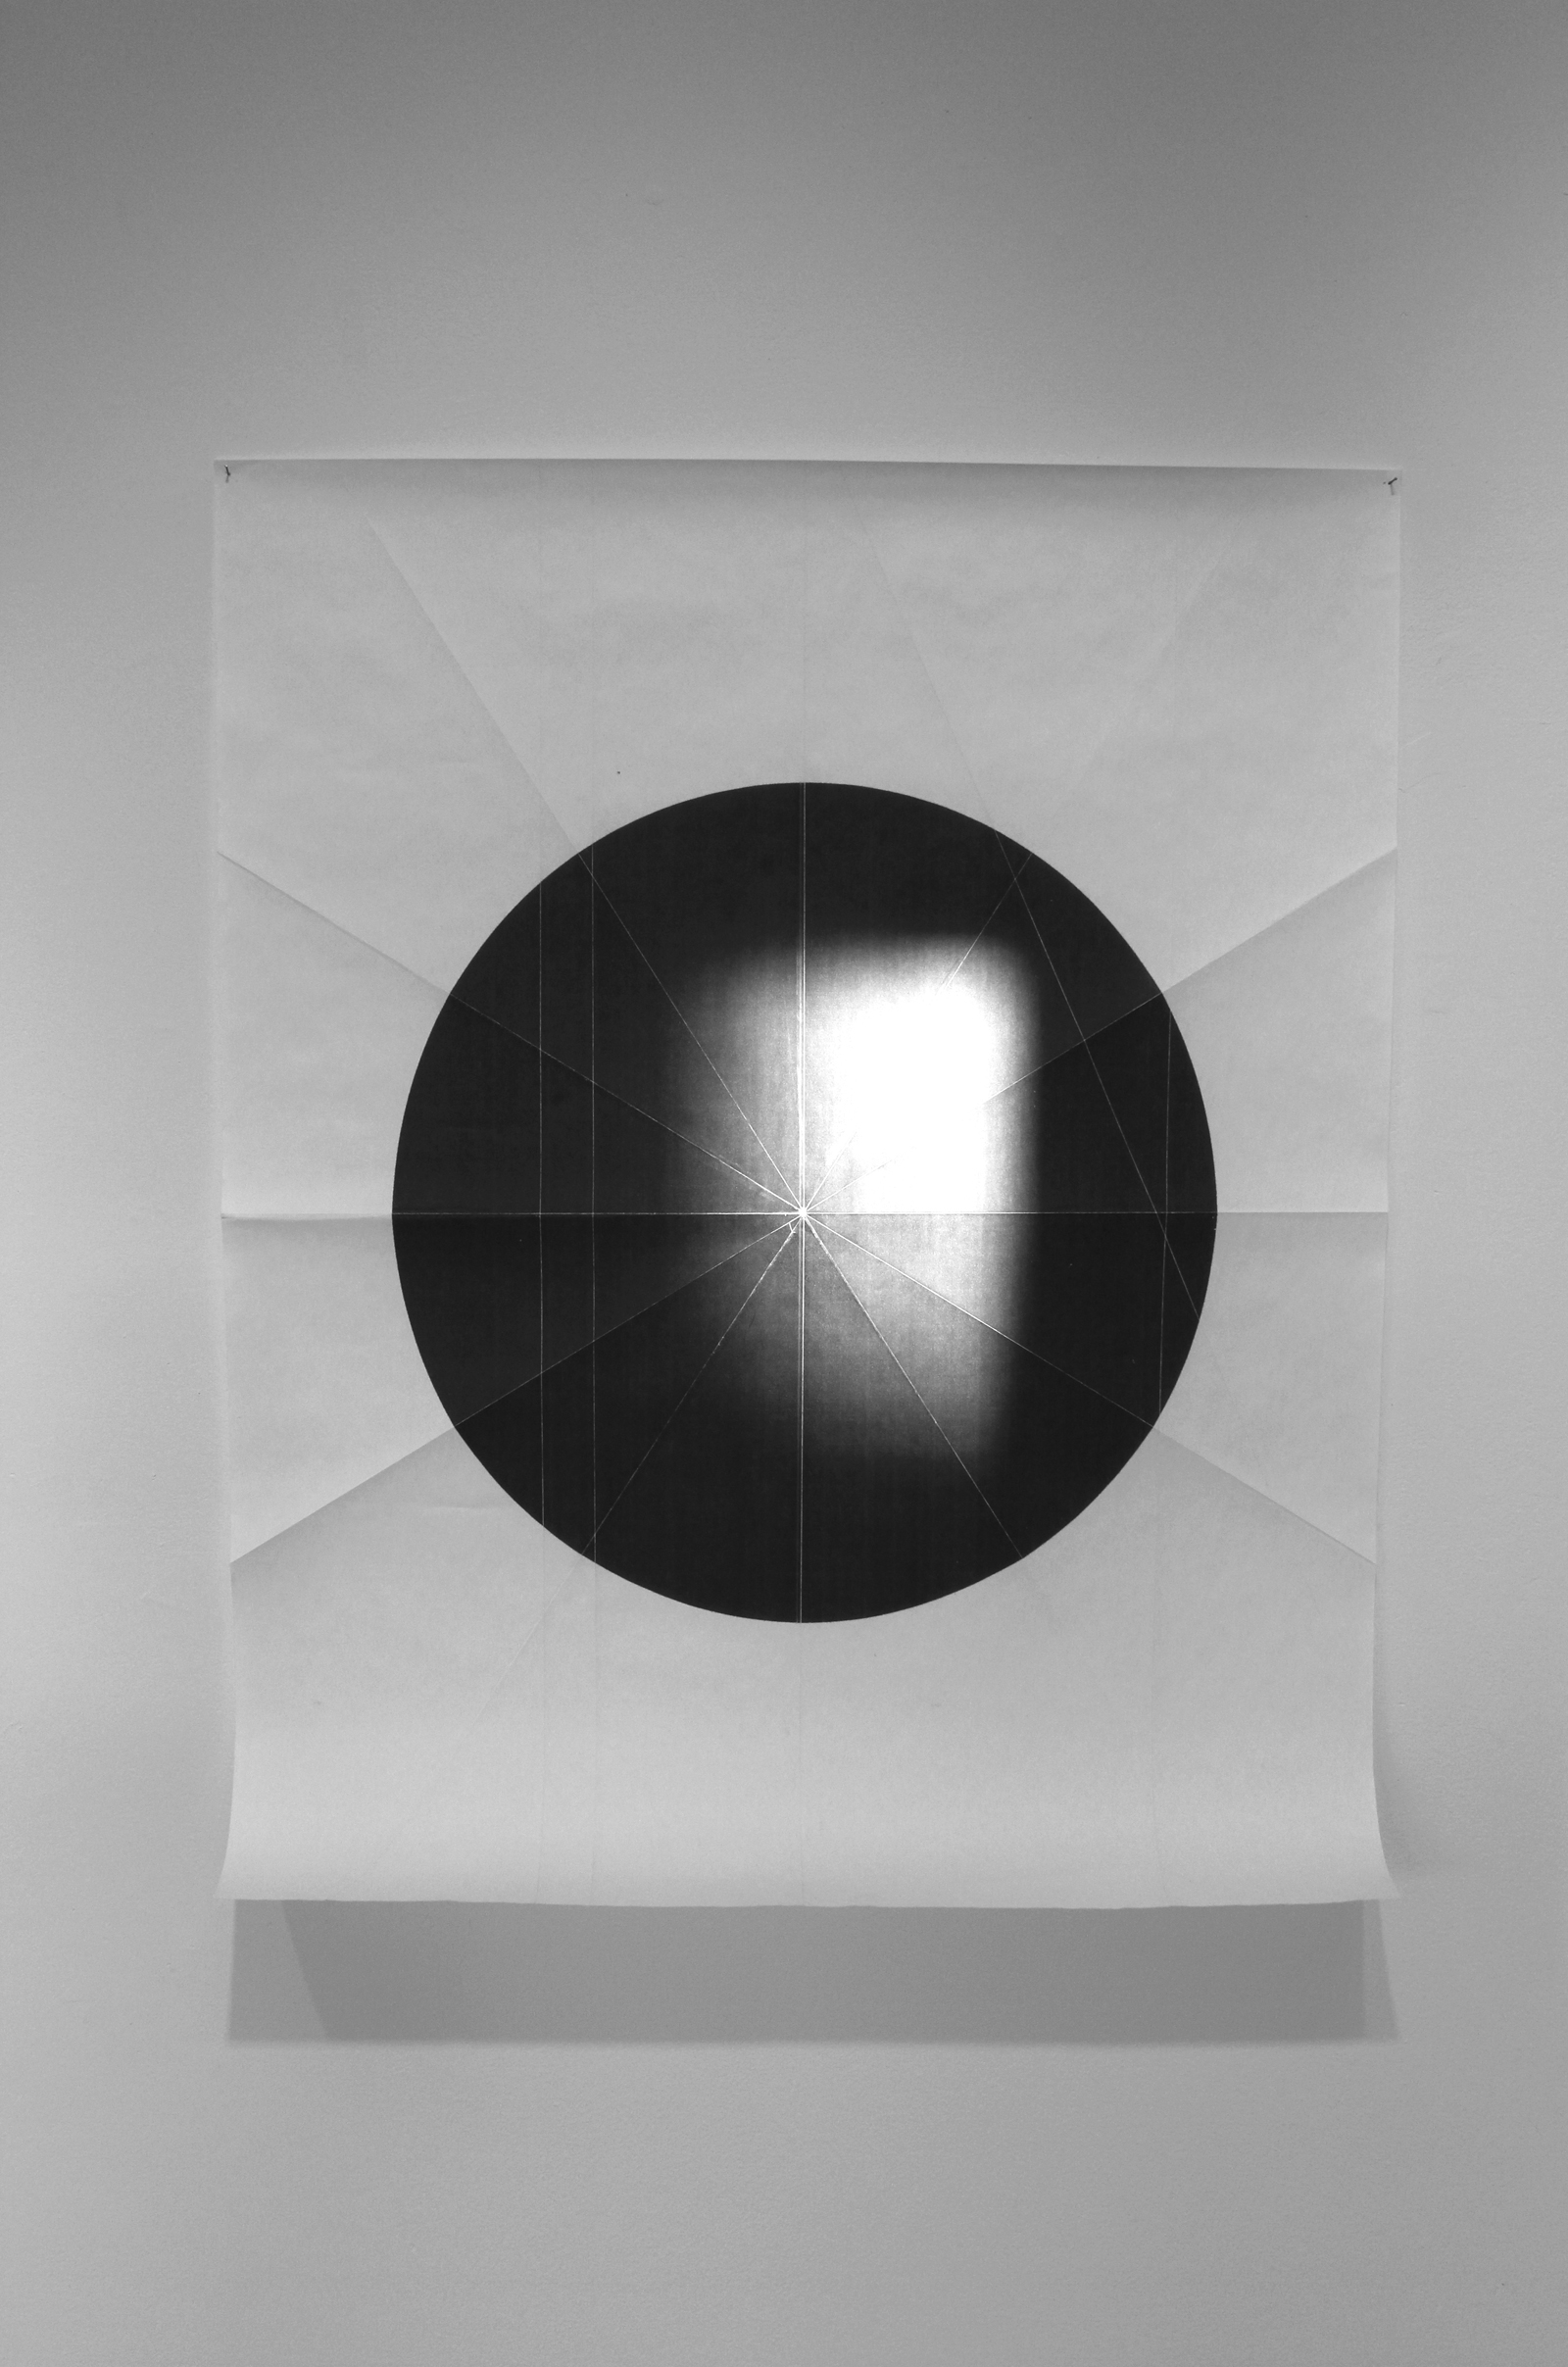   from the ongoing series: O/, Divided/Defined, Weights, Measures, and Emotional Geometry  2011, Folded photocopied circle (pictured here with sun) 107 x 63 inches 